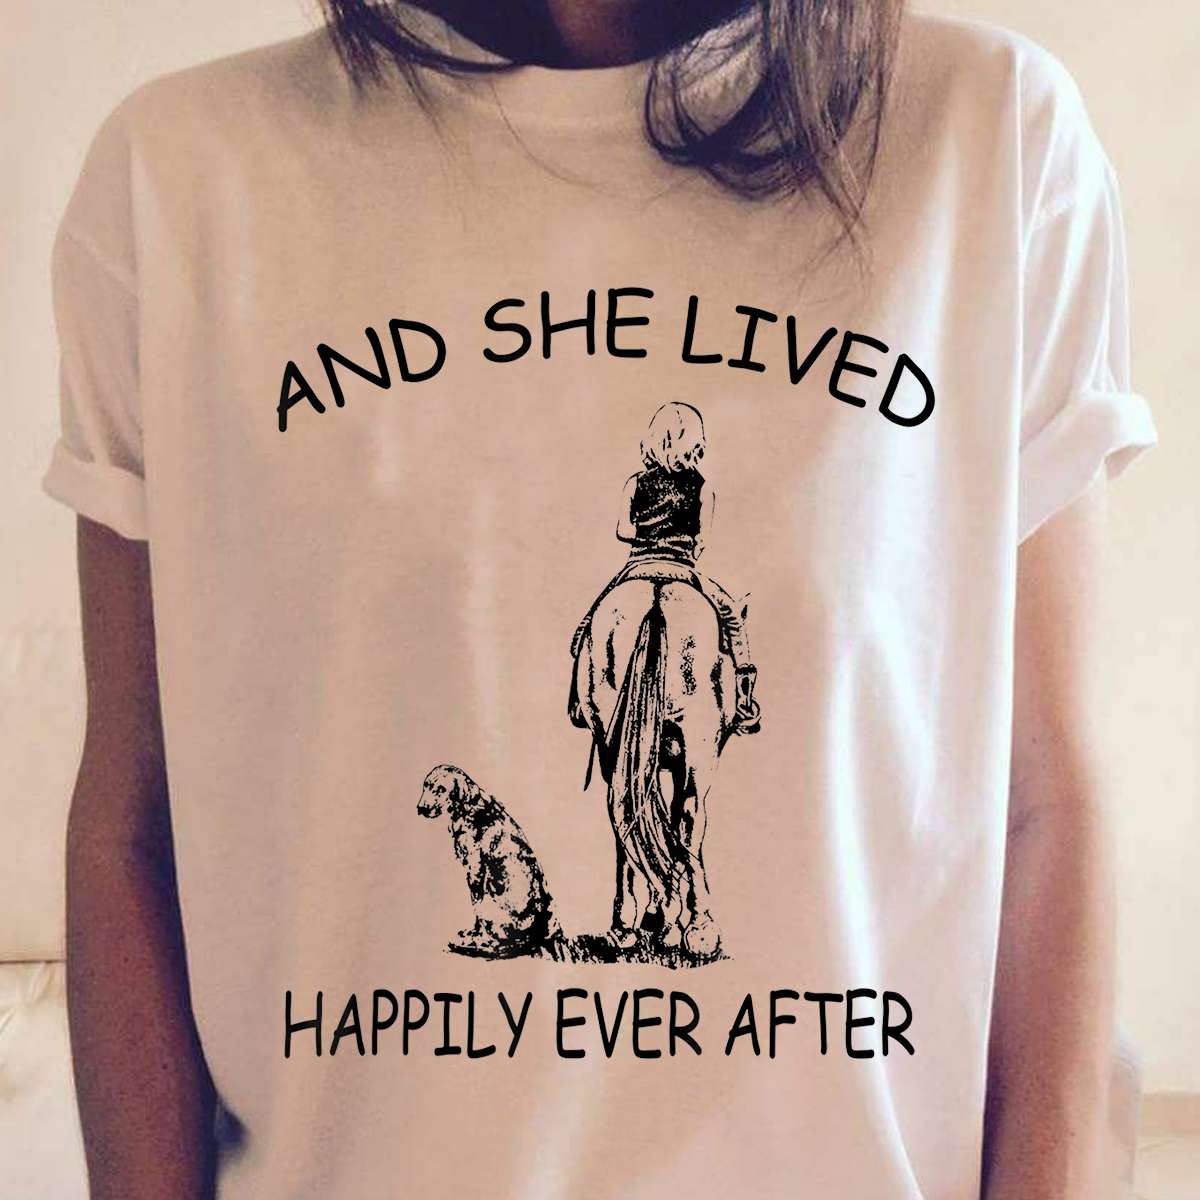 And she lived happily ever after - dogs and horses, happy with horses